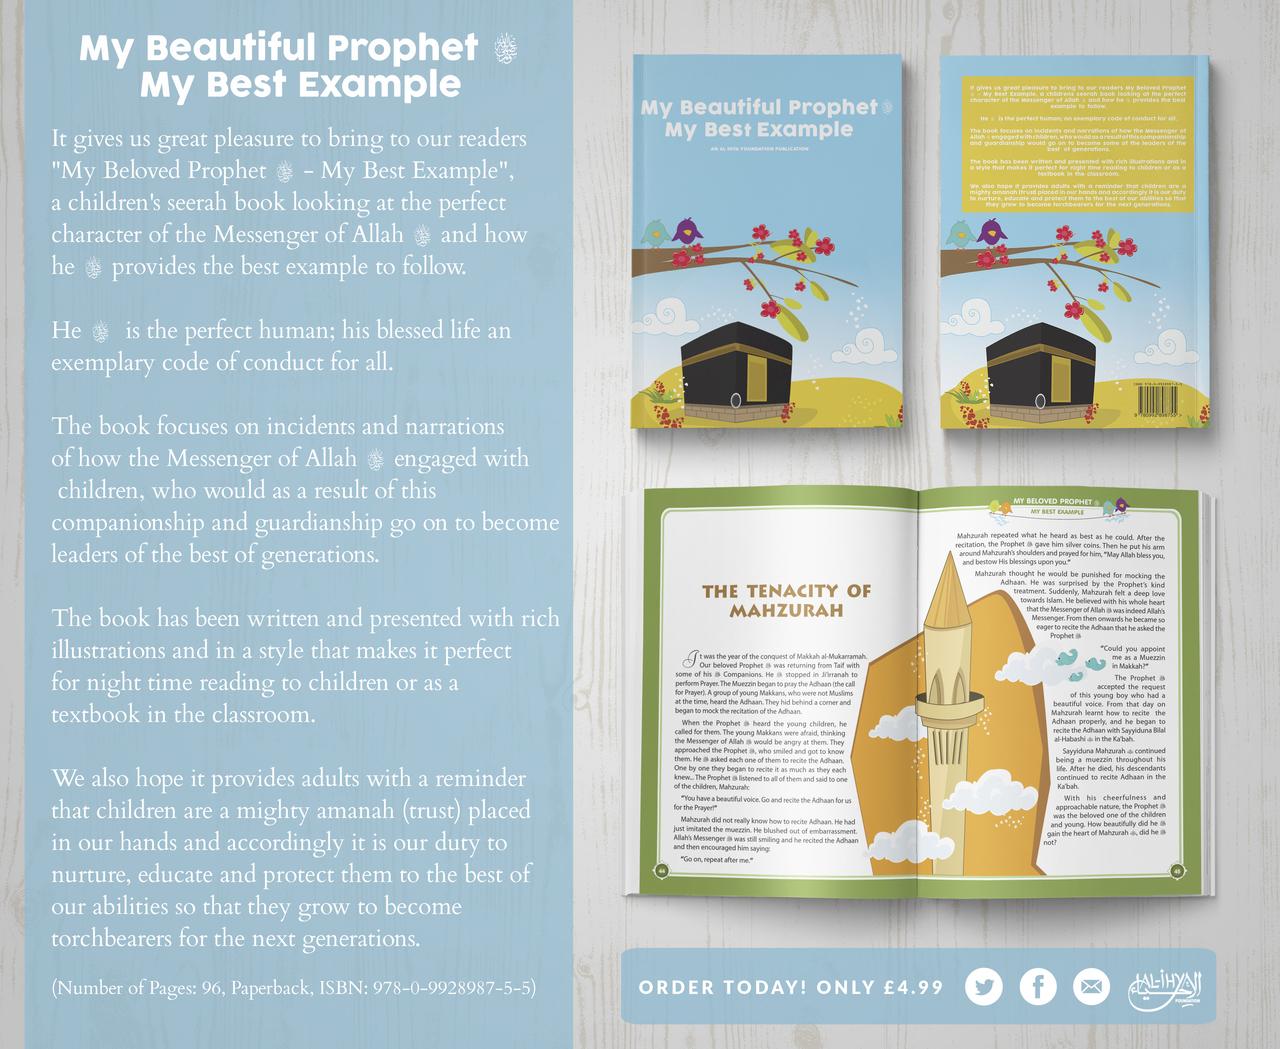 Modal Additional Images for My Beautiful Prophet &#65018; My Best Example